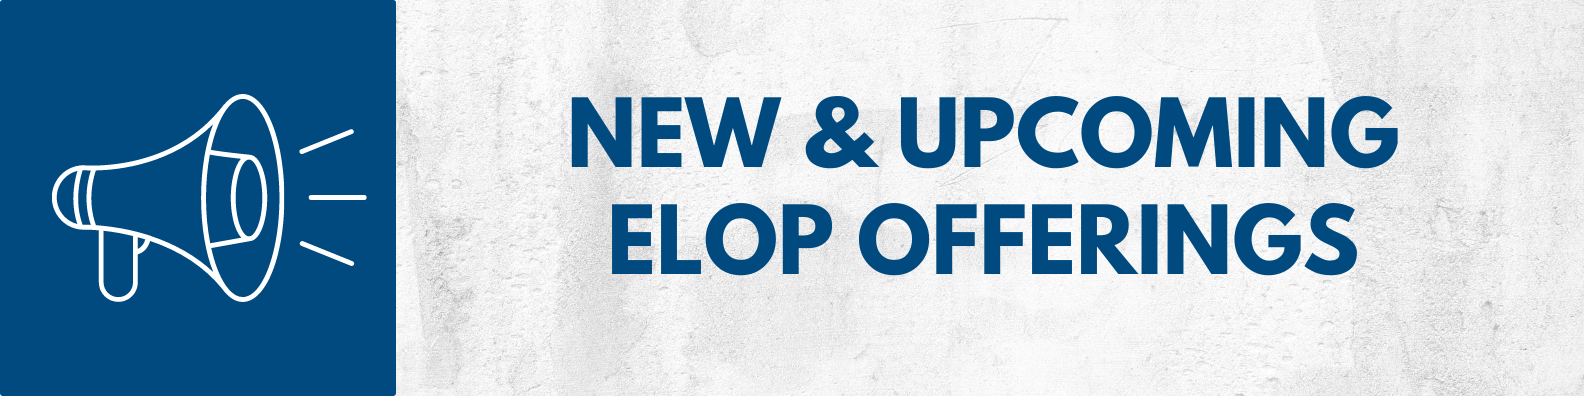 New & Upcoming ELOP Offerings